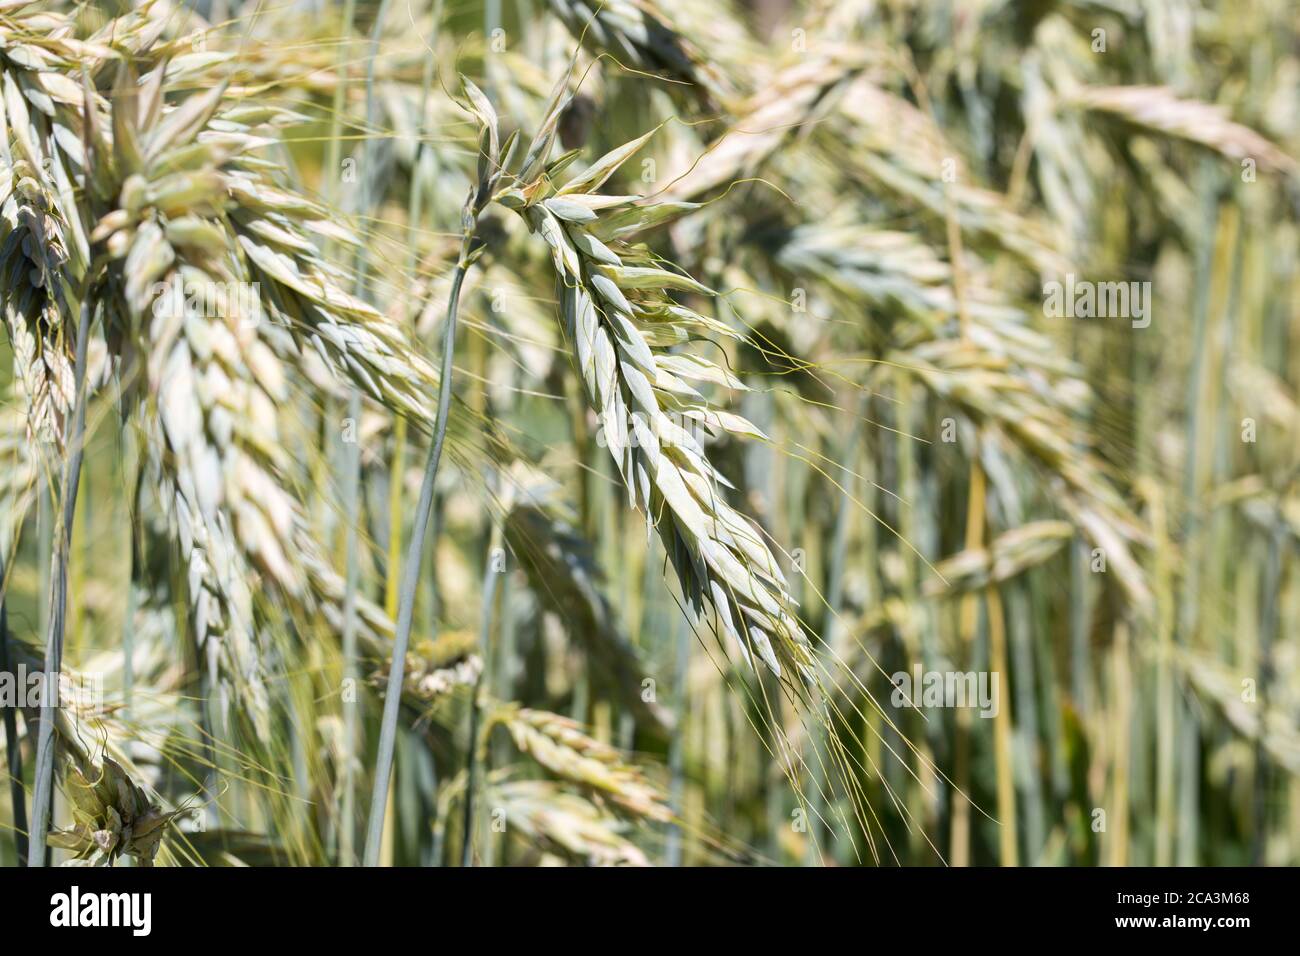 Ears of ripening rye close up. Latin name Secale cereale. Symbol for agriculture and natural food ingredients. Stock Photo